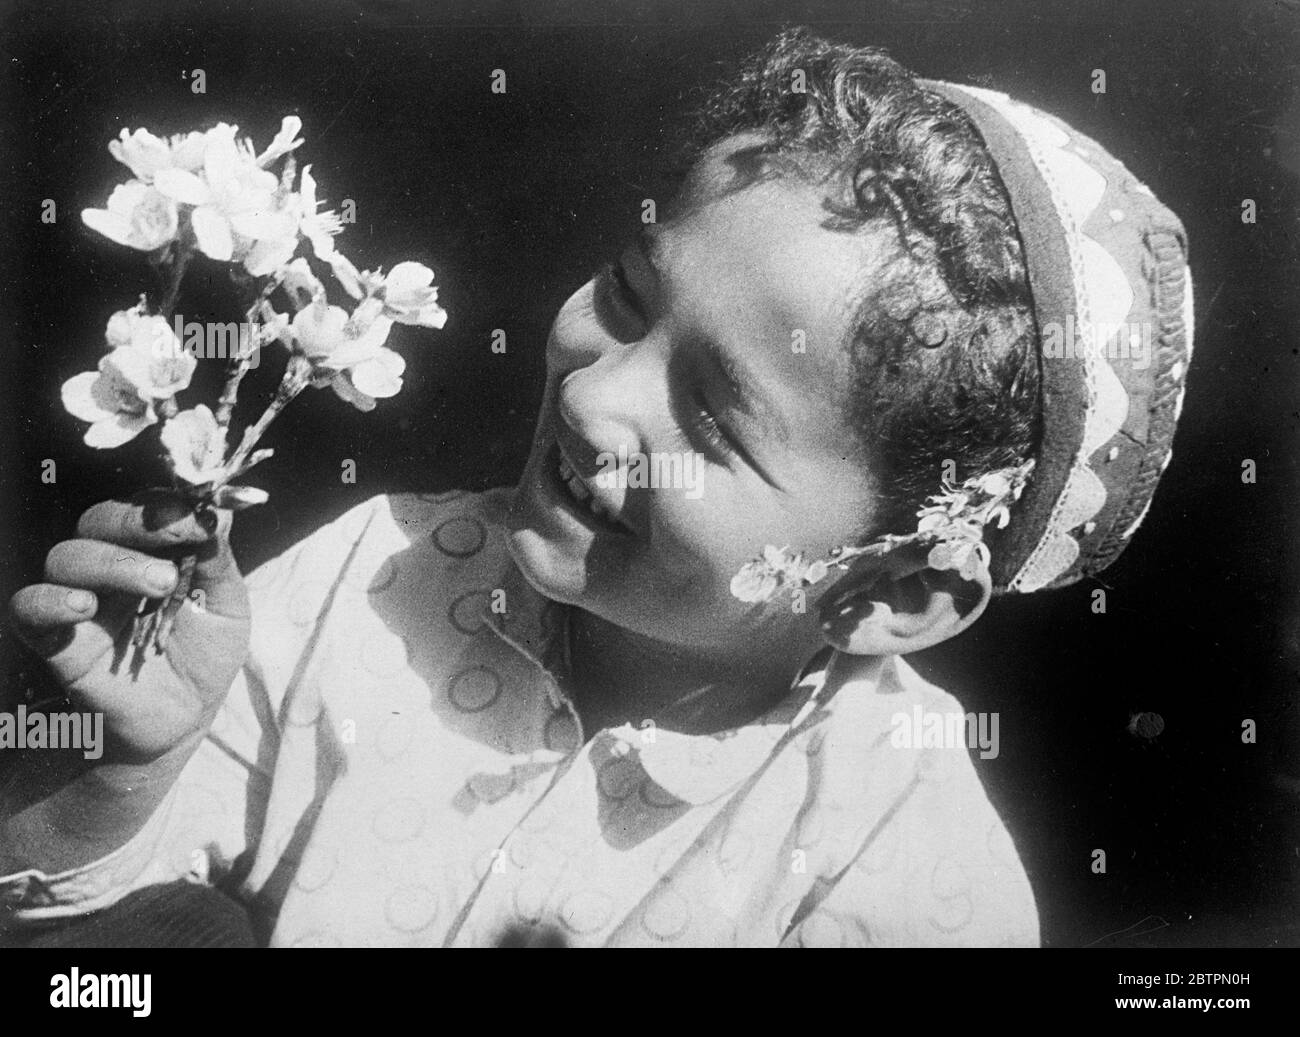 Smile for summer's bounty. Summer, with its riot of almond, apricot and pistachio blossoms, has come to Soviet Middle Asia and this laughing, curly-headed Uzbek Boyd has a welcoming smile for the spray of apricot blossom he has plucked from the bough. 24 April 1937 [around?] Stock Photo